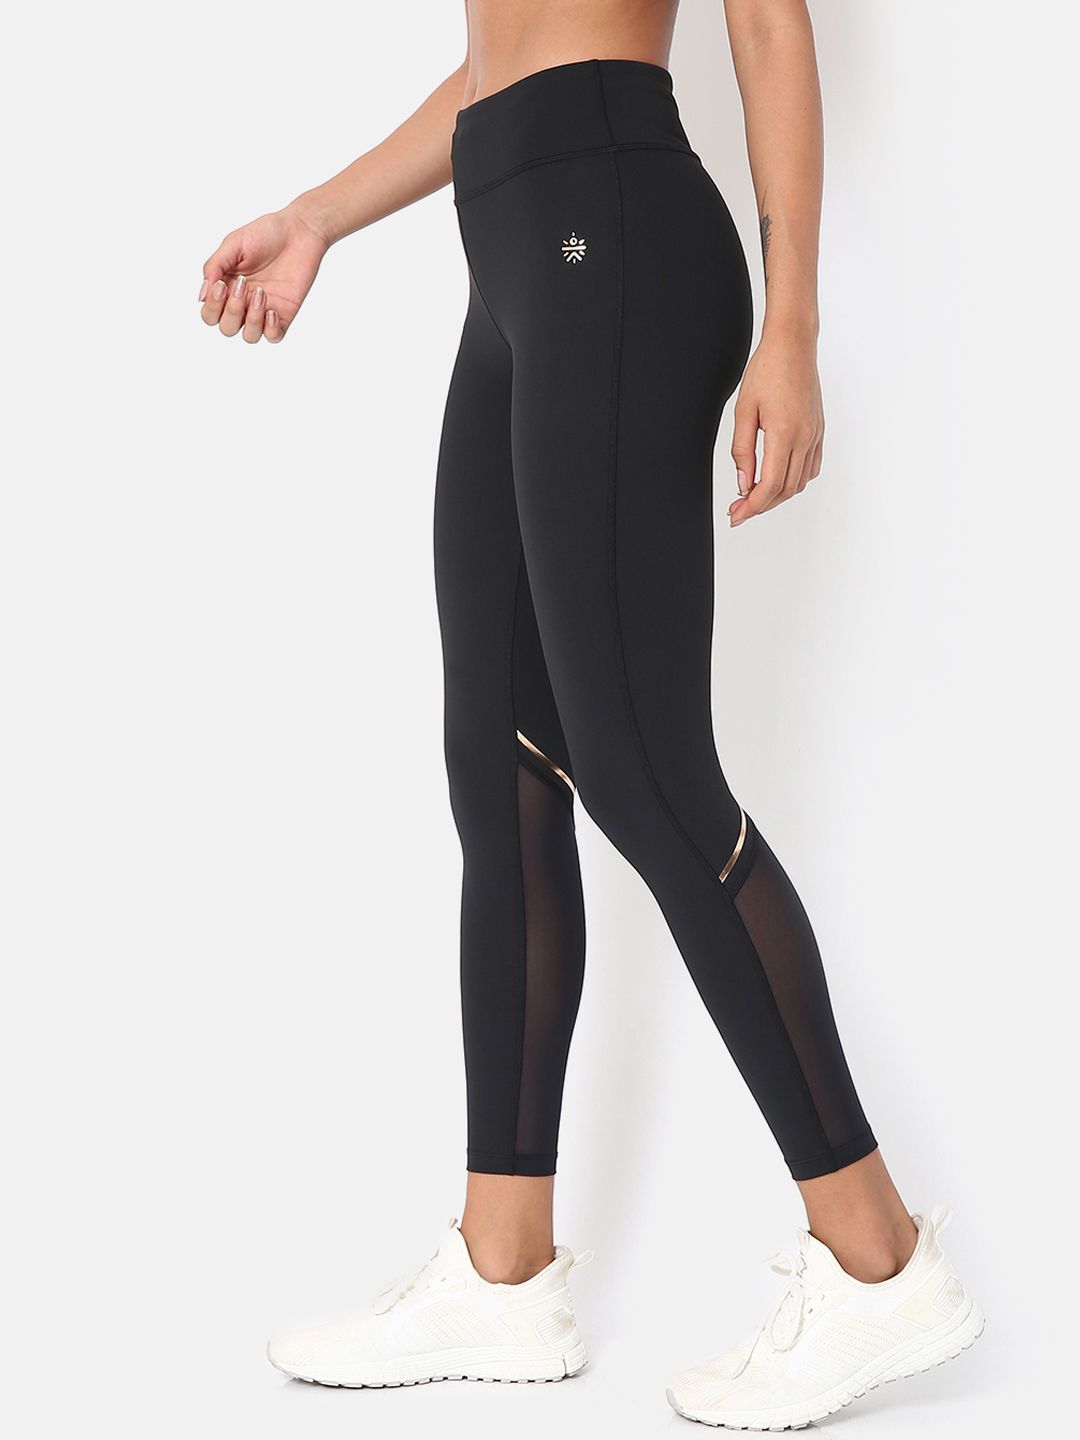 Cultsport Women Black Solid Absolute-Fit Tights Price in India